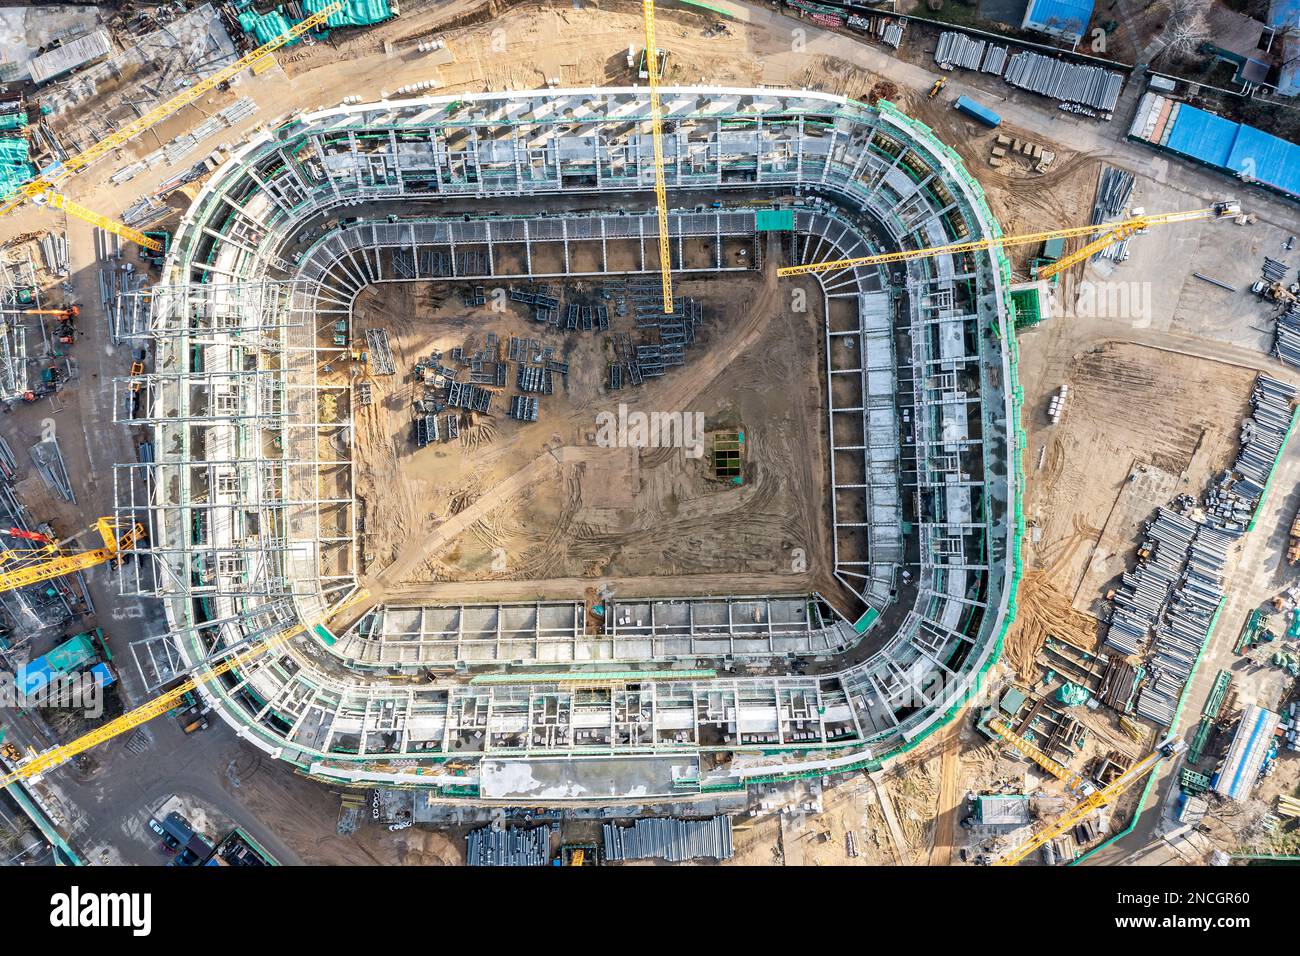 MINSK, BELARUS - 13 NOVEMBER, 2022: Construction of new football stadium. Aerial top view of construction equipment, cranes, heavy machinery and build Stock Photo